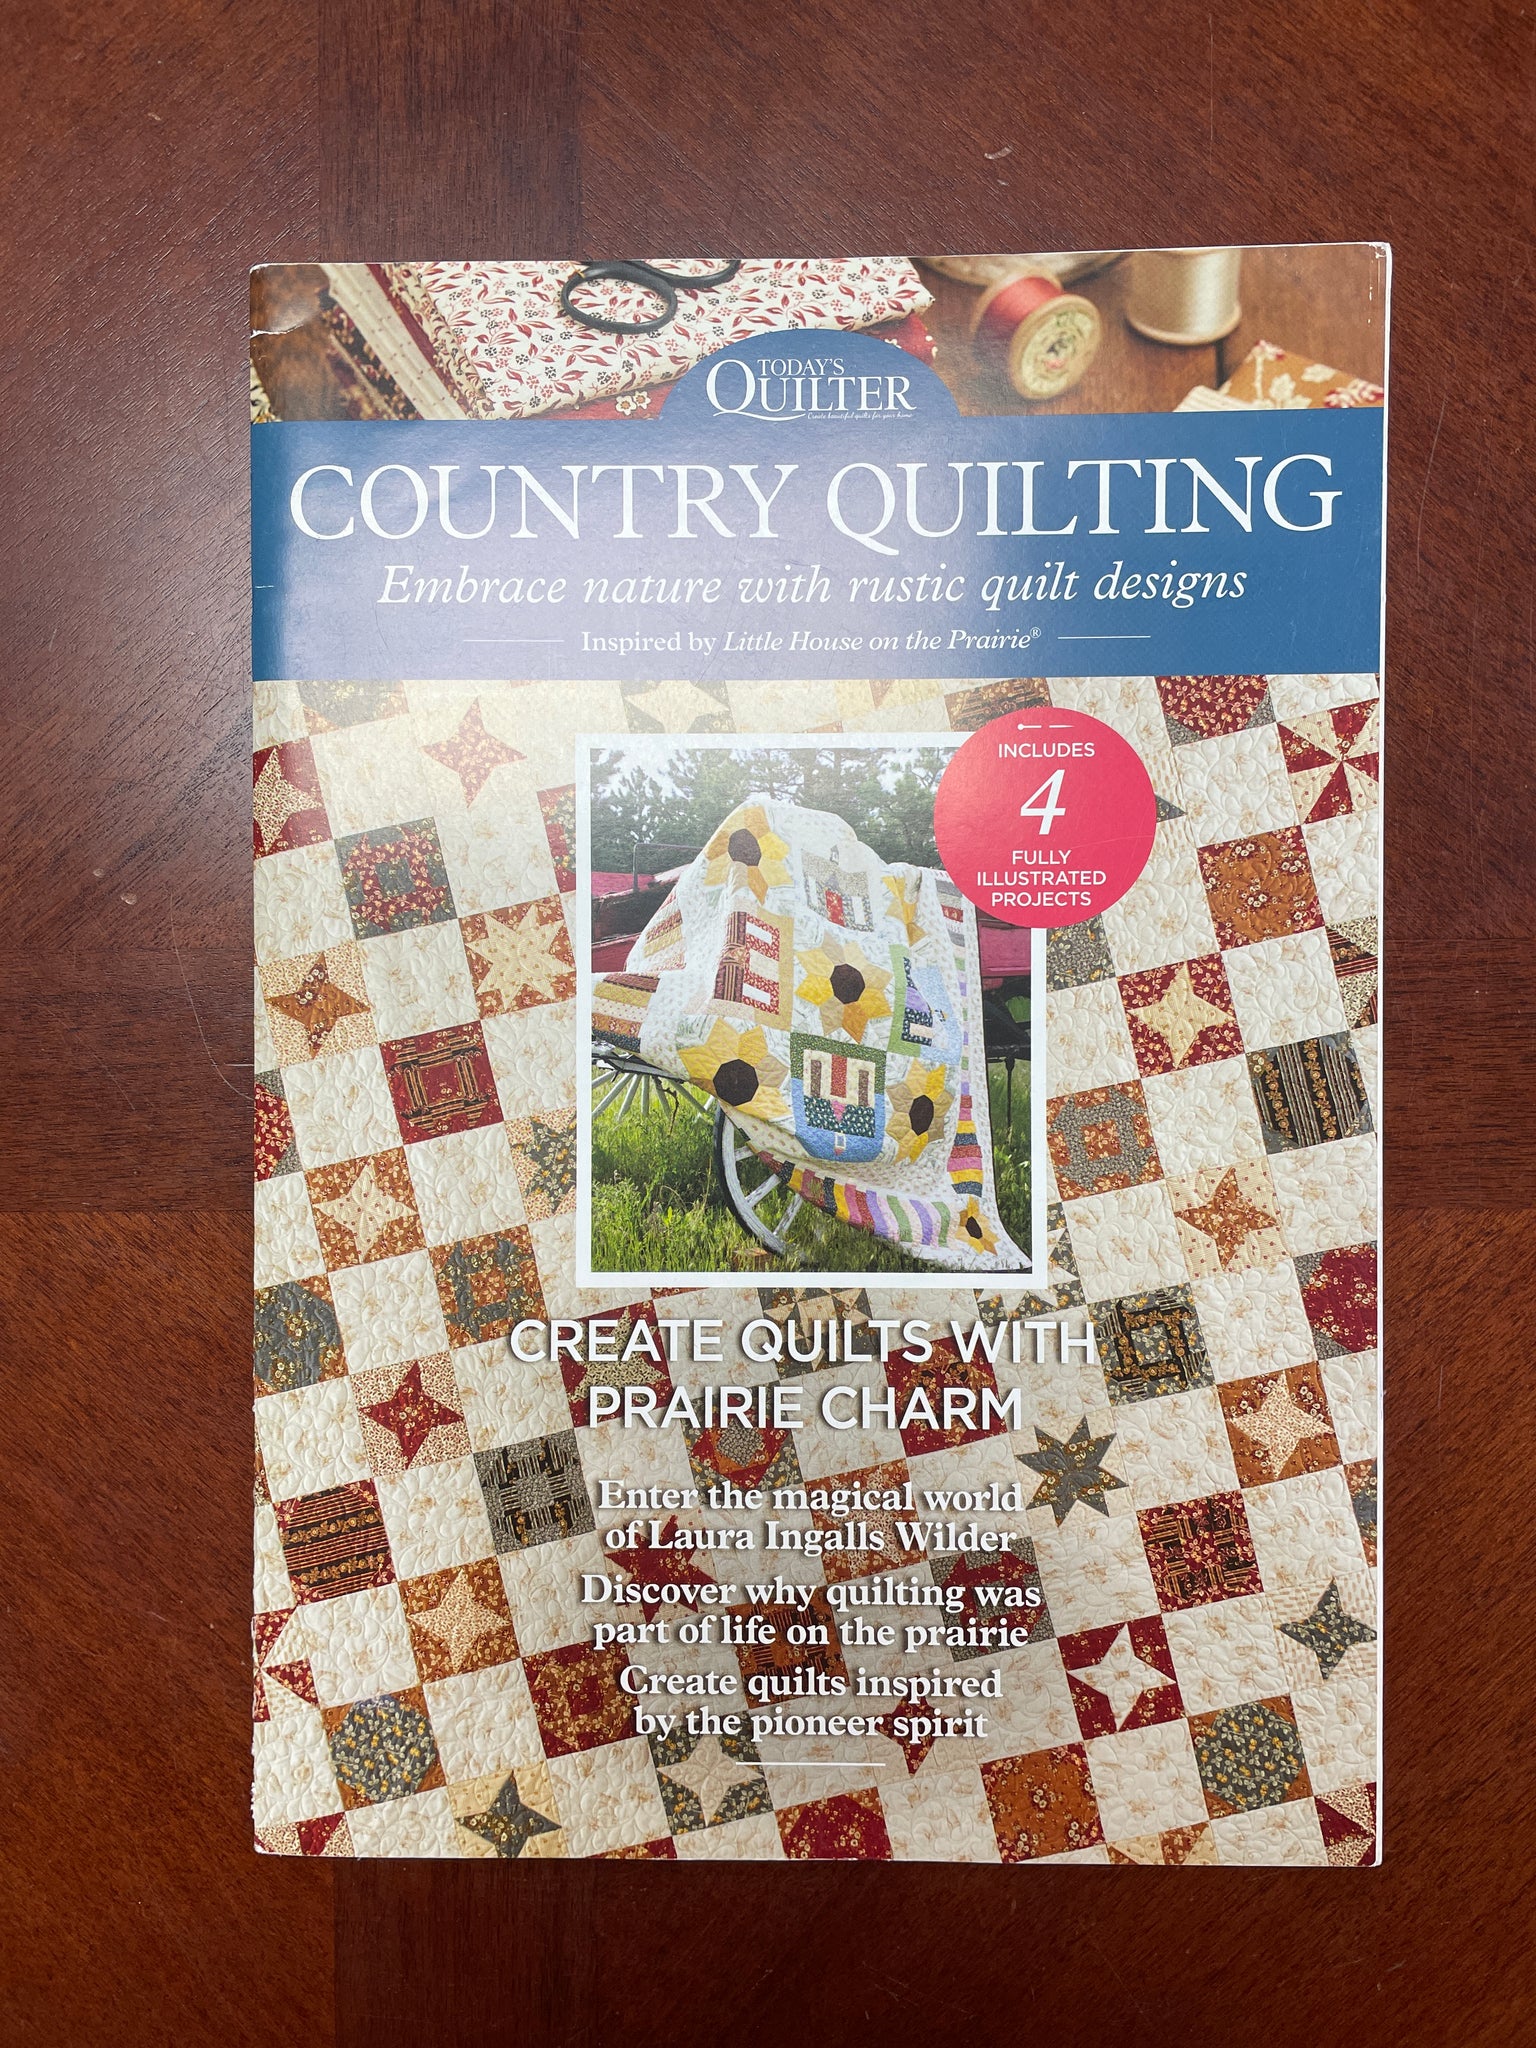 2015 Quilting Book - "Country Quilting"